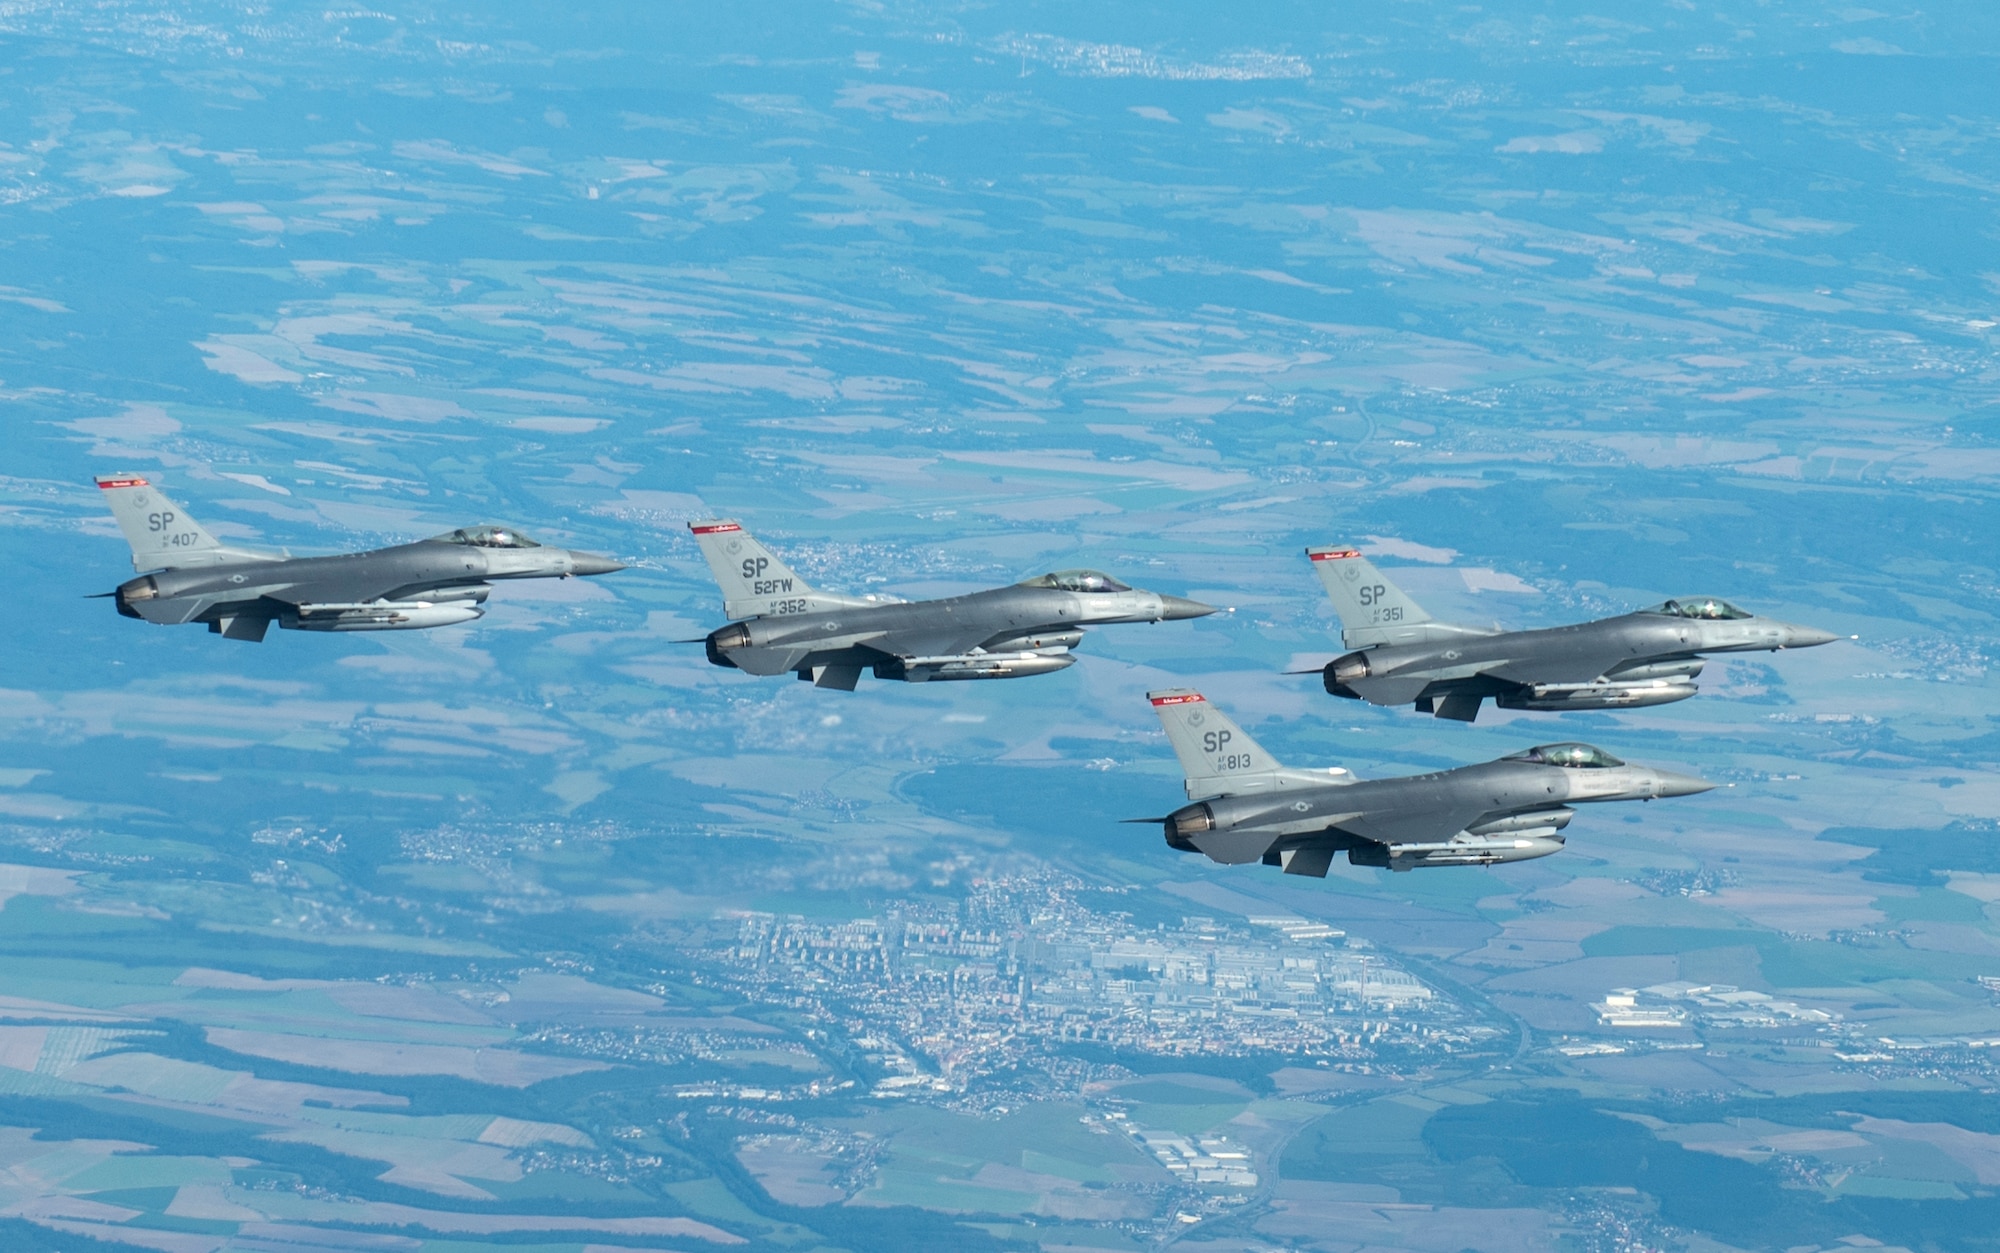 Four U.S. Air Force F-16 Fighting Falcons, assigned to the 52nd Fighter Wing fly towards Czechia from Spangdahlem Air Base, Germany, Sept. 19, 2020. These aircraft later joined others as they participated in flyovers near Ostrava, Czechia.  (U.S. Air Force photo by Senior Airman Chanceler Nardone)